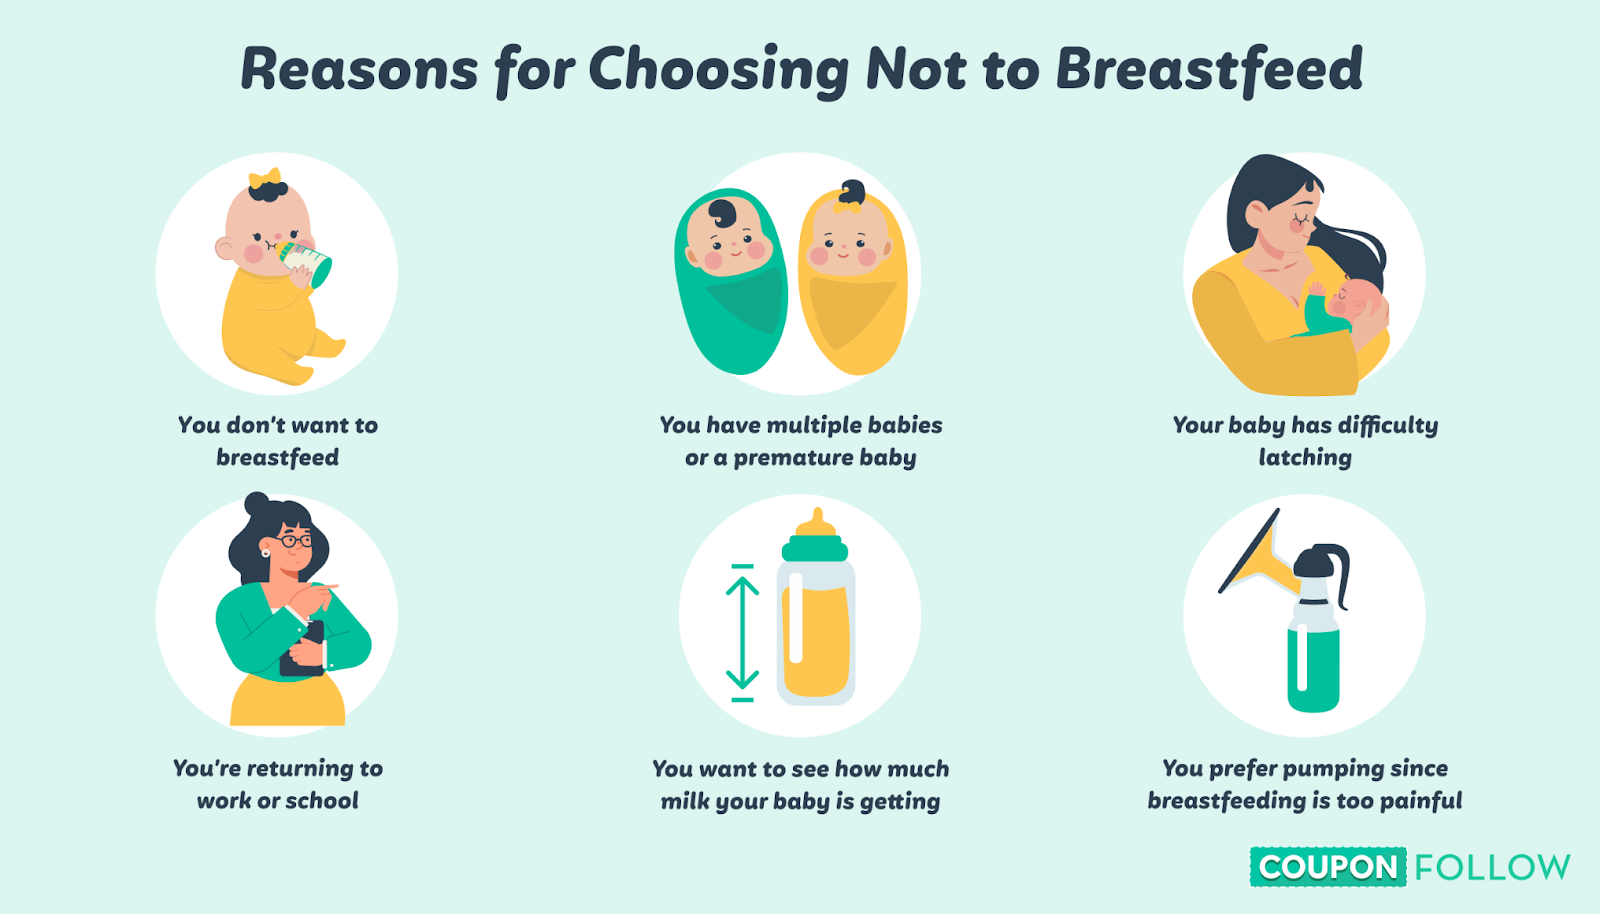 Image showing the different reasons for breastfeeding